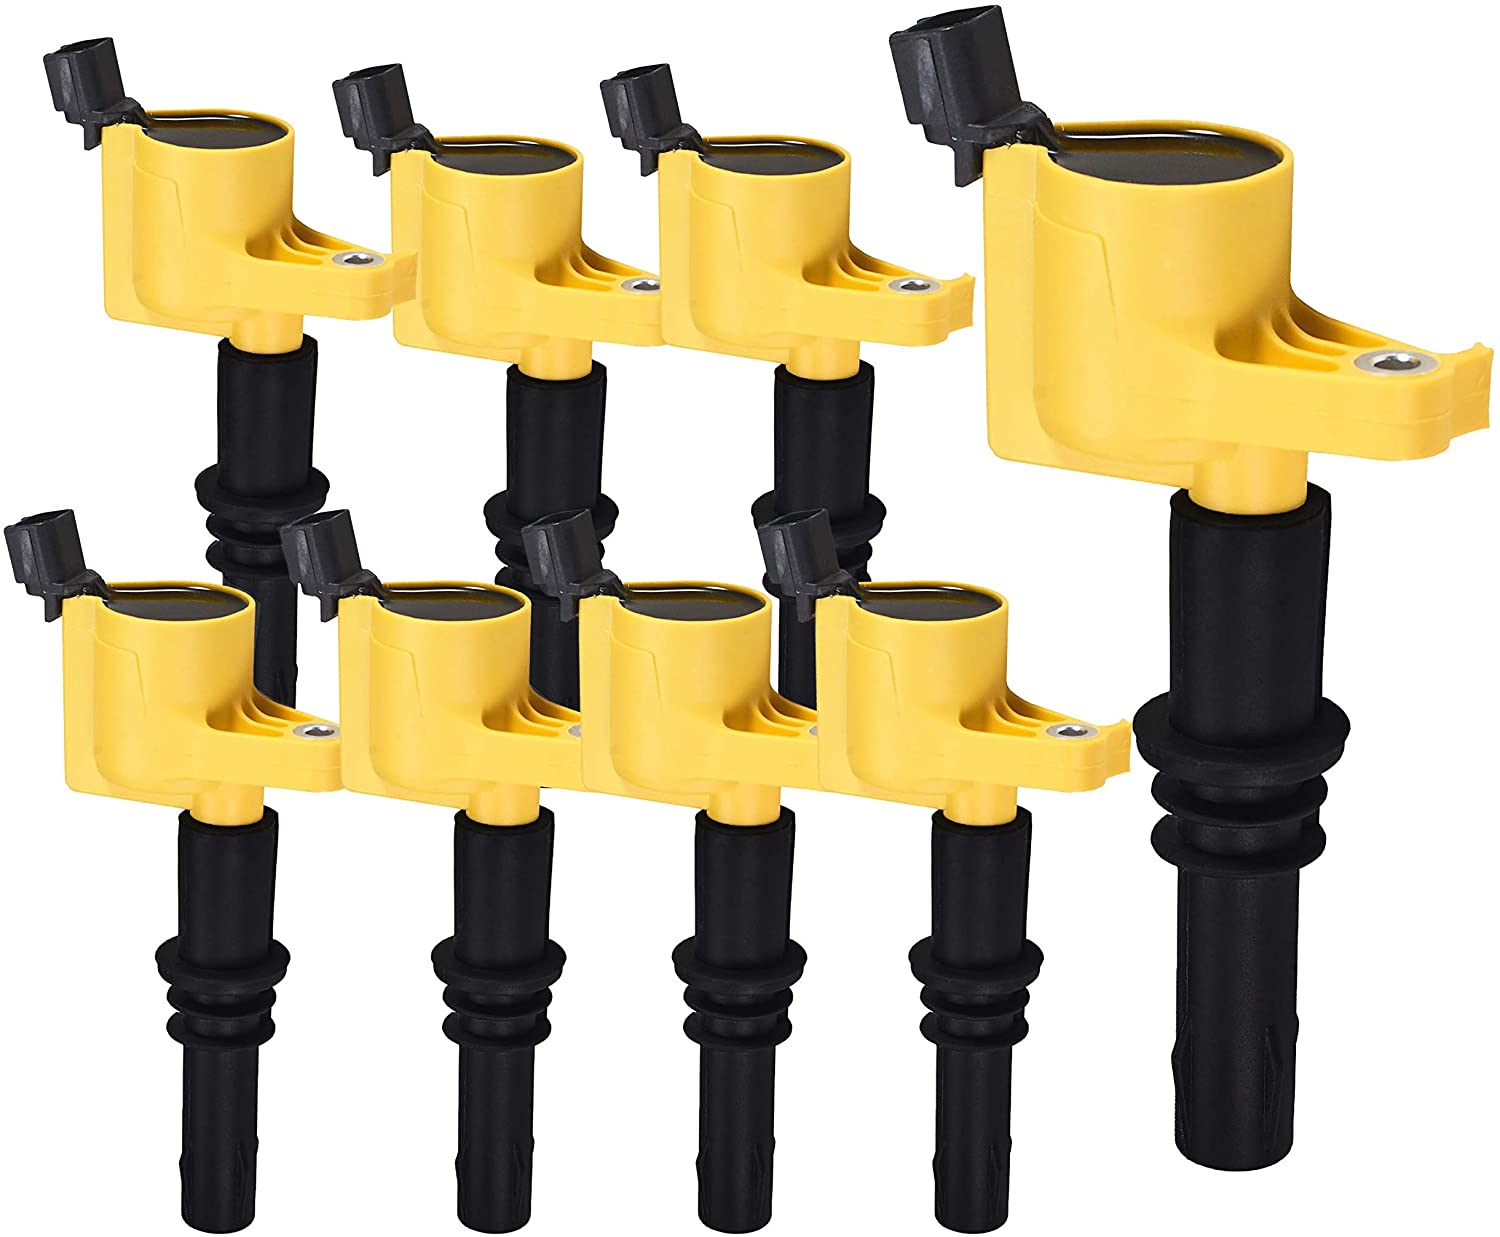 ENA Heavy Duty Set of 8 Ignition Coils compatible with Ford F150 F-150 F250 Expedition Explorer Mustang Lincoln Mercury 5.4L 4.6L 6.8L V8 V10 compatible with DG511 5C1584 C1541 (8)